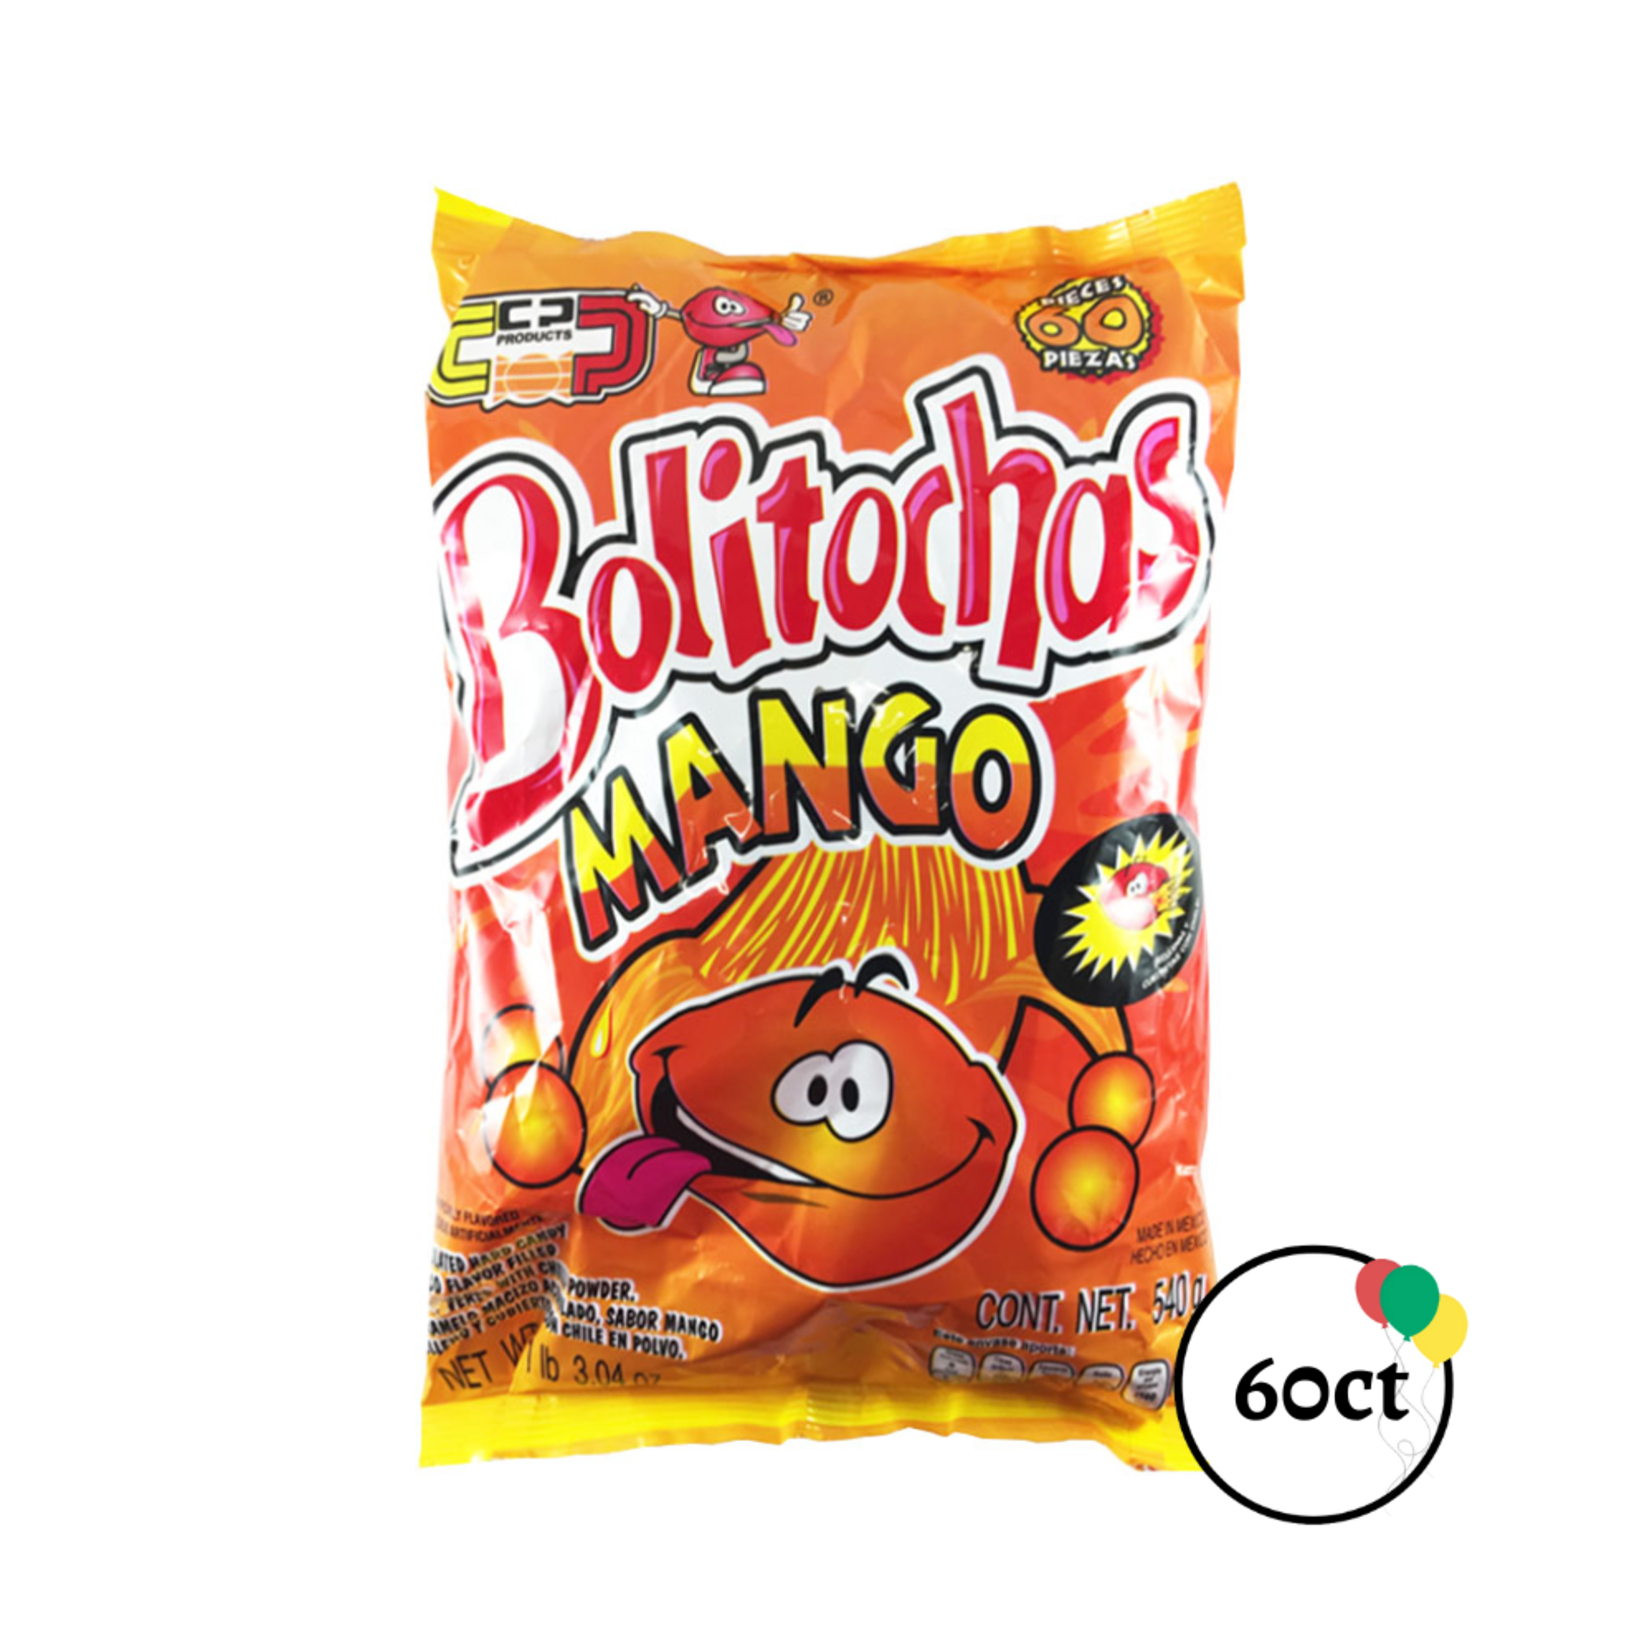 Candy Pop Products Bolitochas Mango 60ct